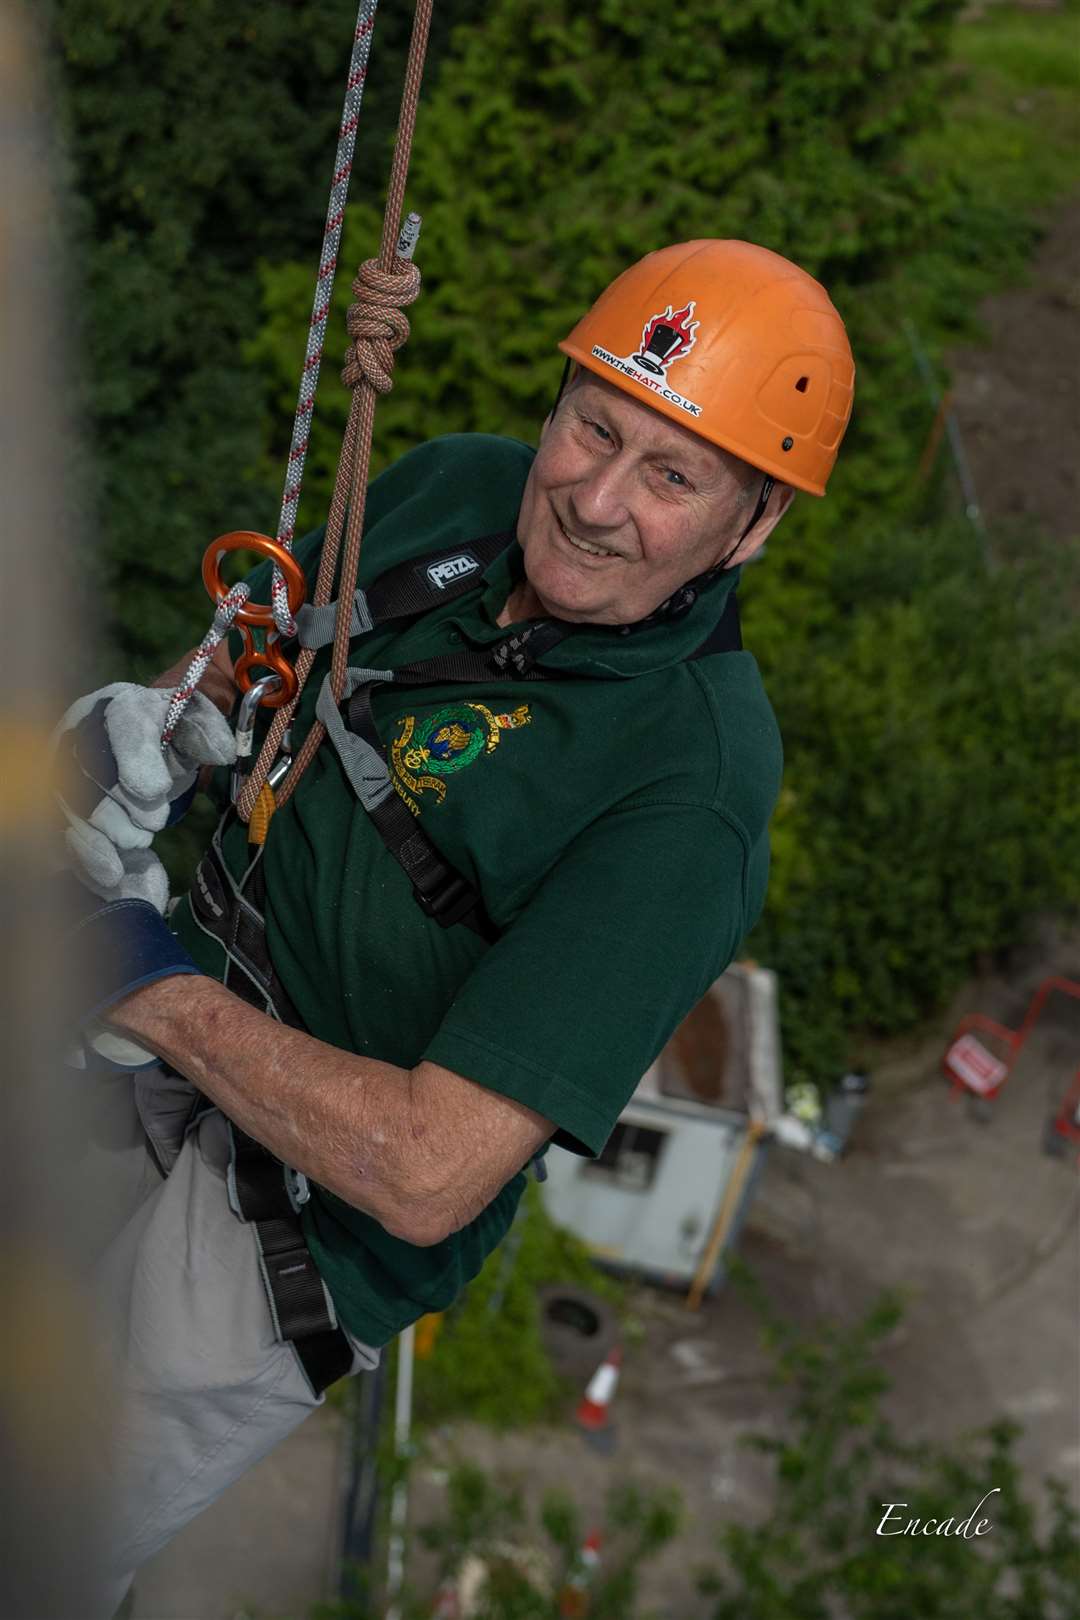 83-year-old former Royal Marine Albert Tweddle from Sandwich taking part in the KM Charity Team's Spring Abseil challenge